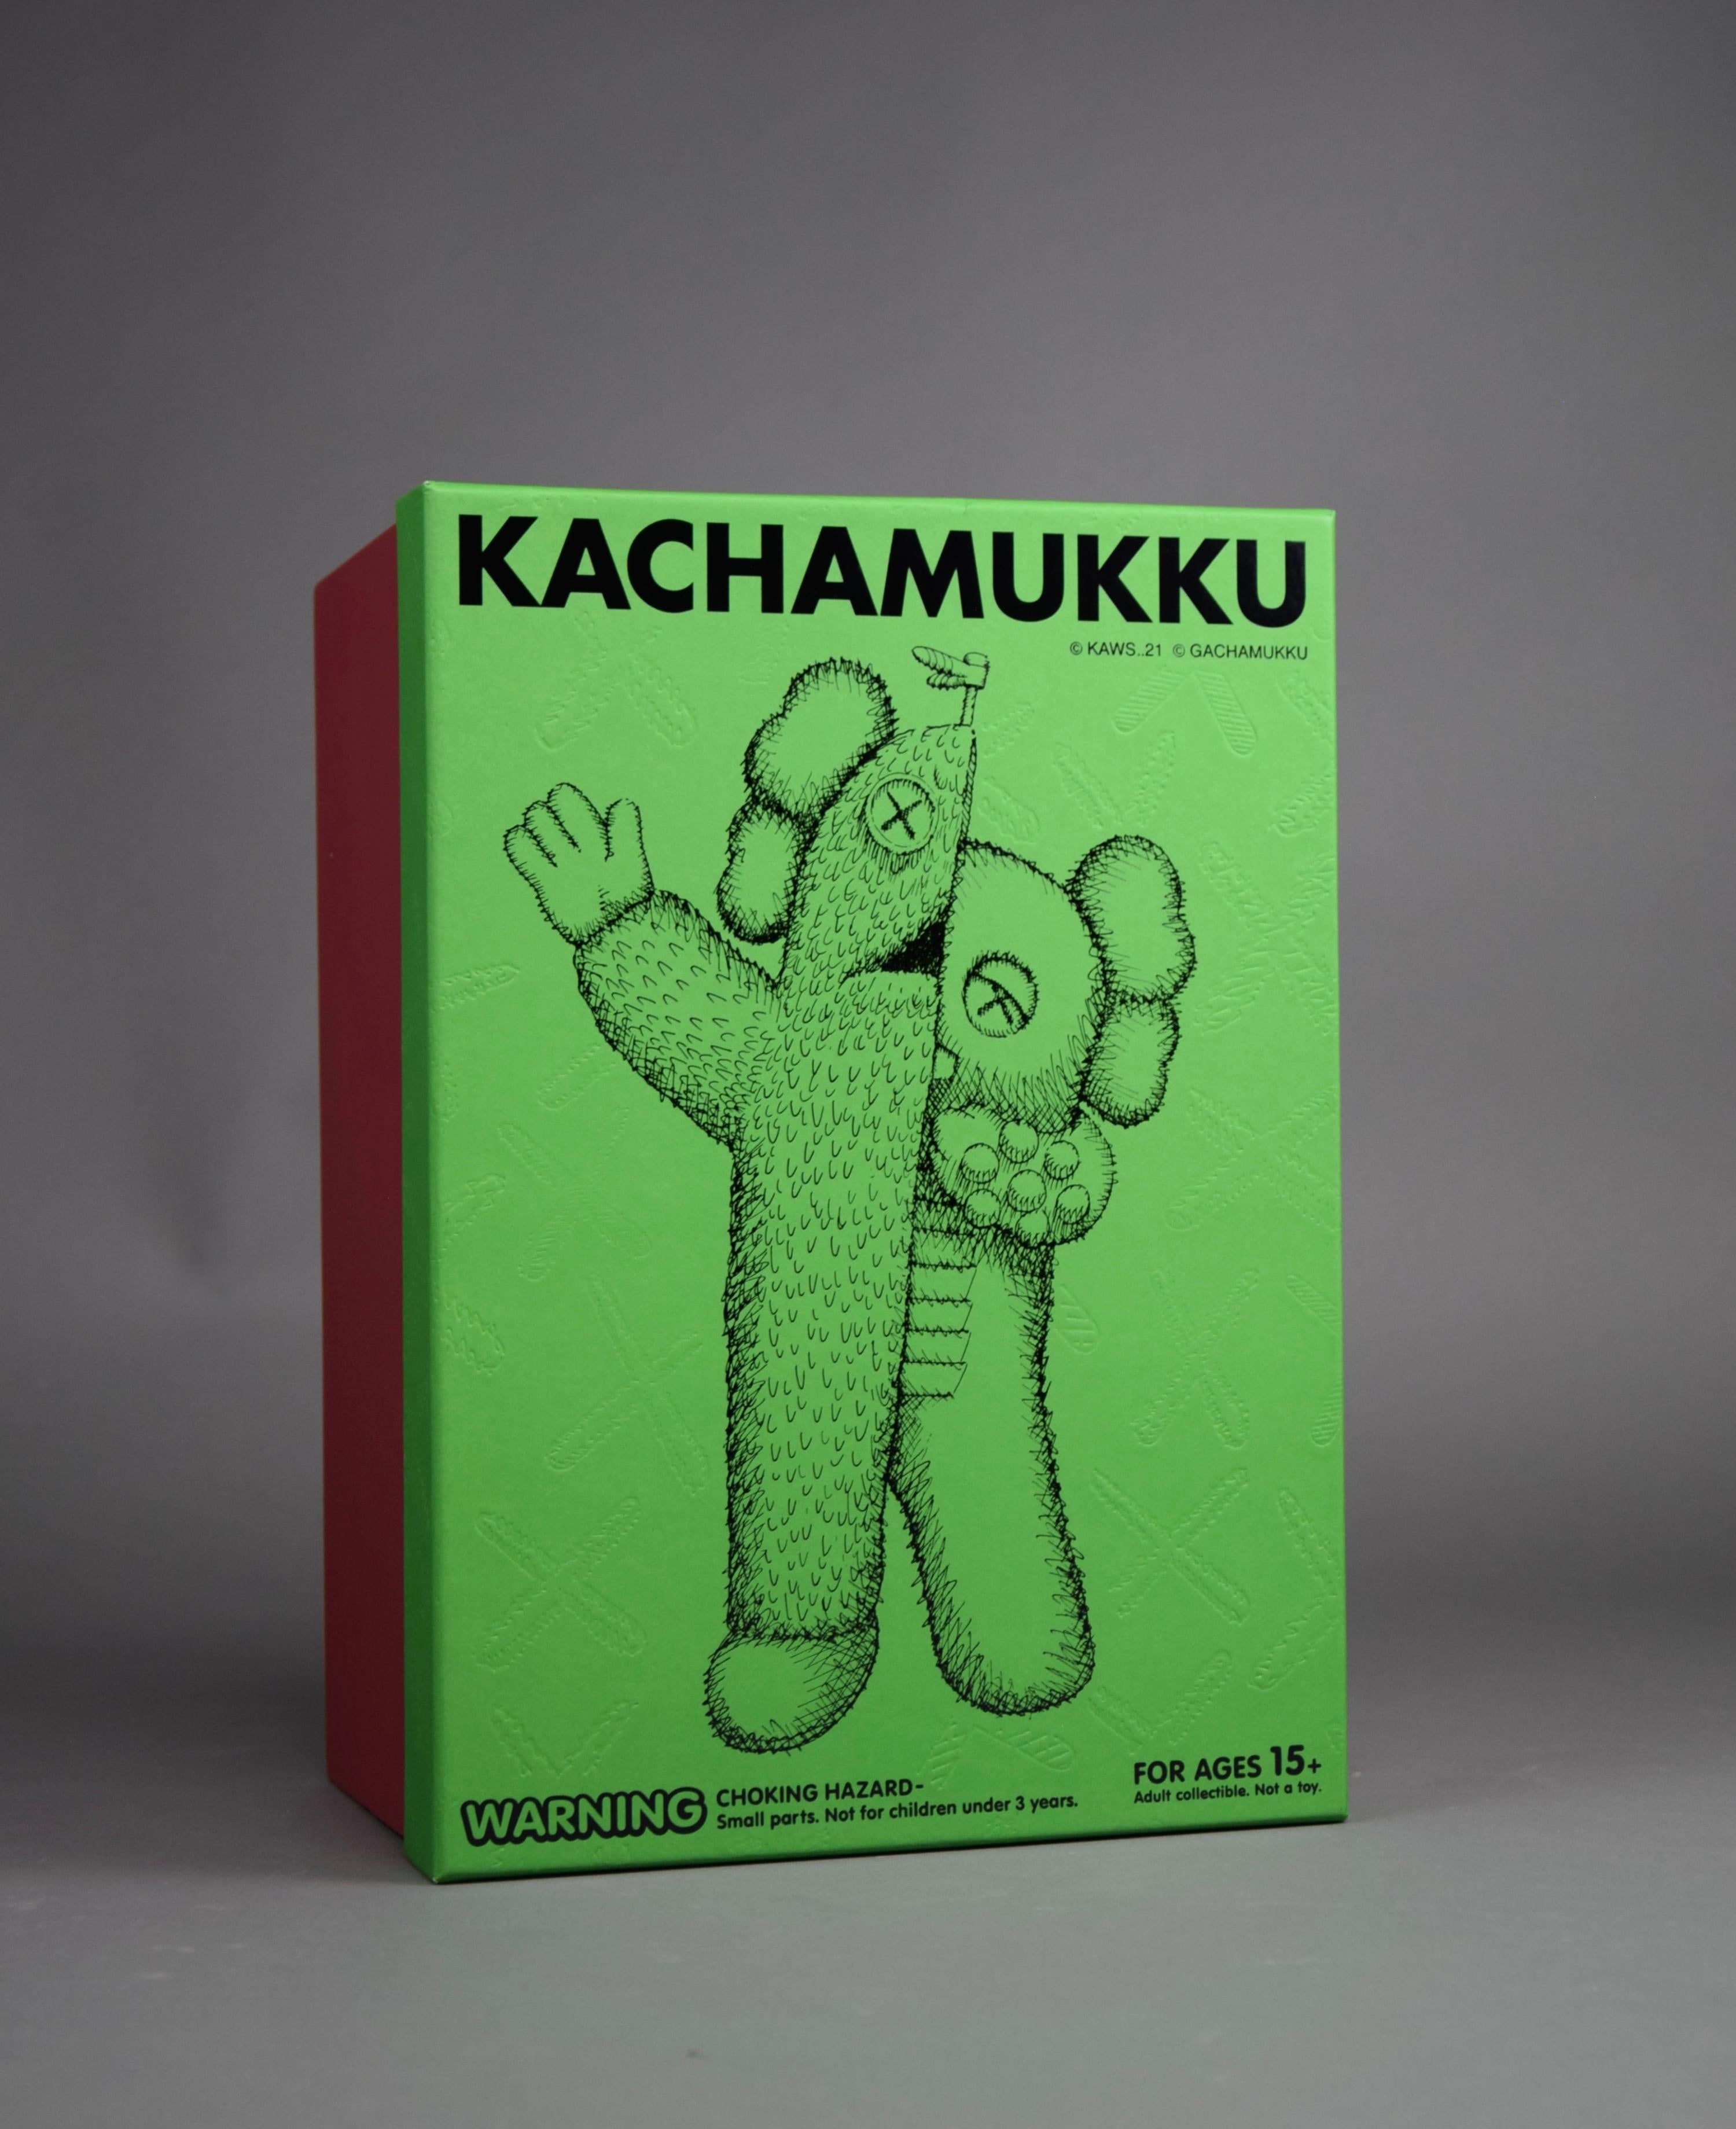 Kachamukku Designer Toy by KAWS - Where Art Meets Imagination!

Are you ready to elevate your collection to a whole new level of artistic brilliance? Look no further, as the Kachamukku Designer Toy by KAWS is here to captivate your senses and take